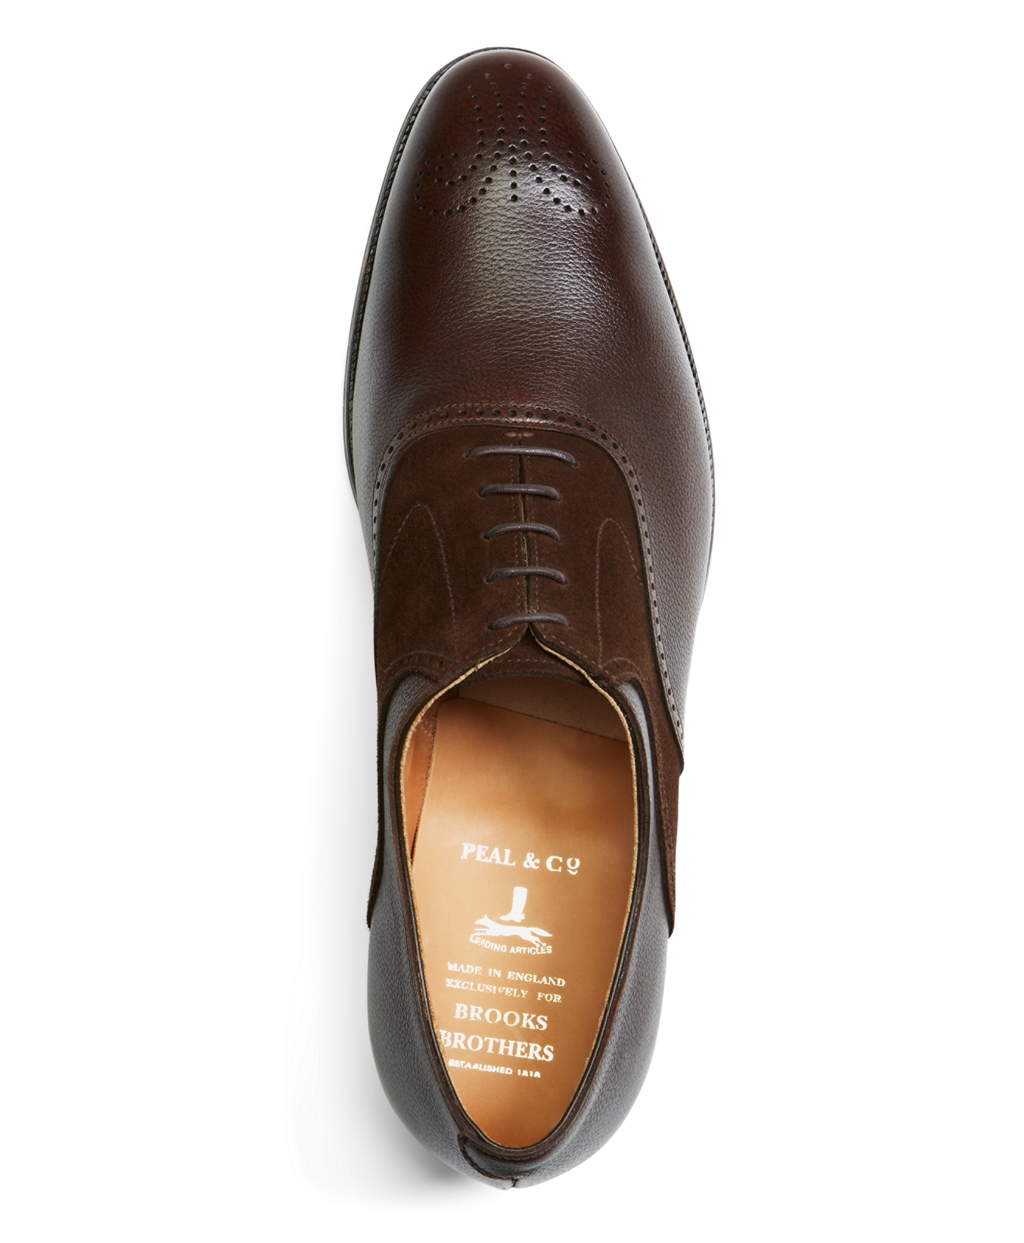 Lyst - Brooks Brothers Peal & Co.® Suede And Leather Saddle Shoes in ...